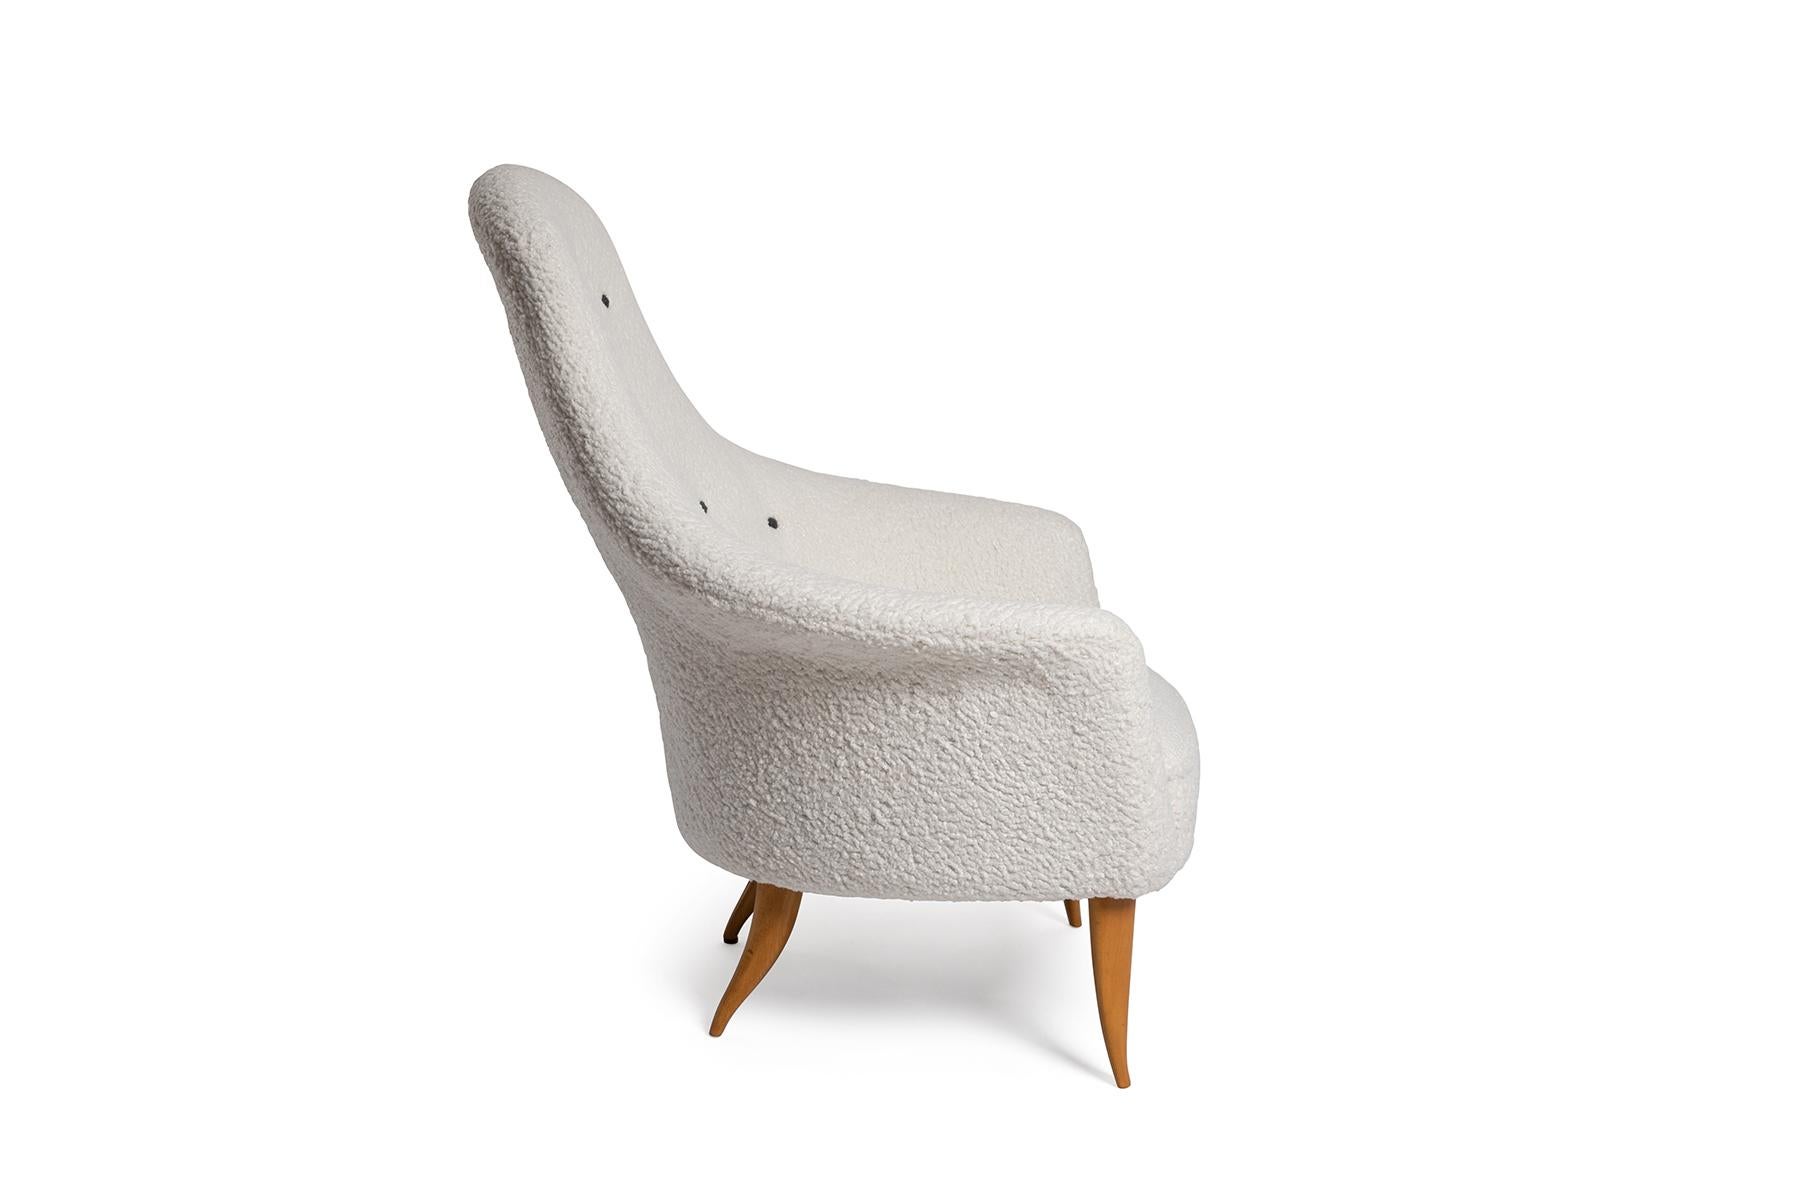 Kerstin Holmquist Eva chair circa early 1960's. This sculptural example has been newly upholstered in a faux lambskin and the legs have been newly finished.